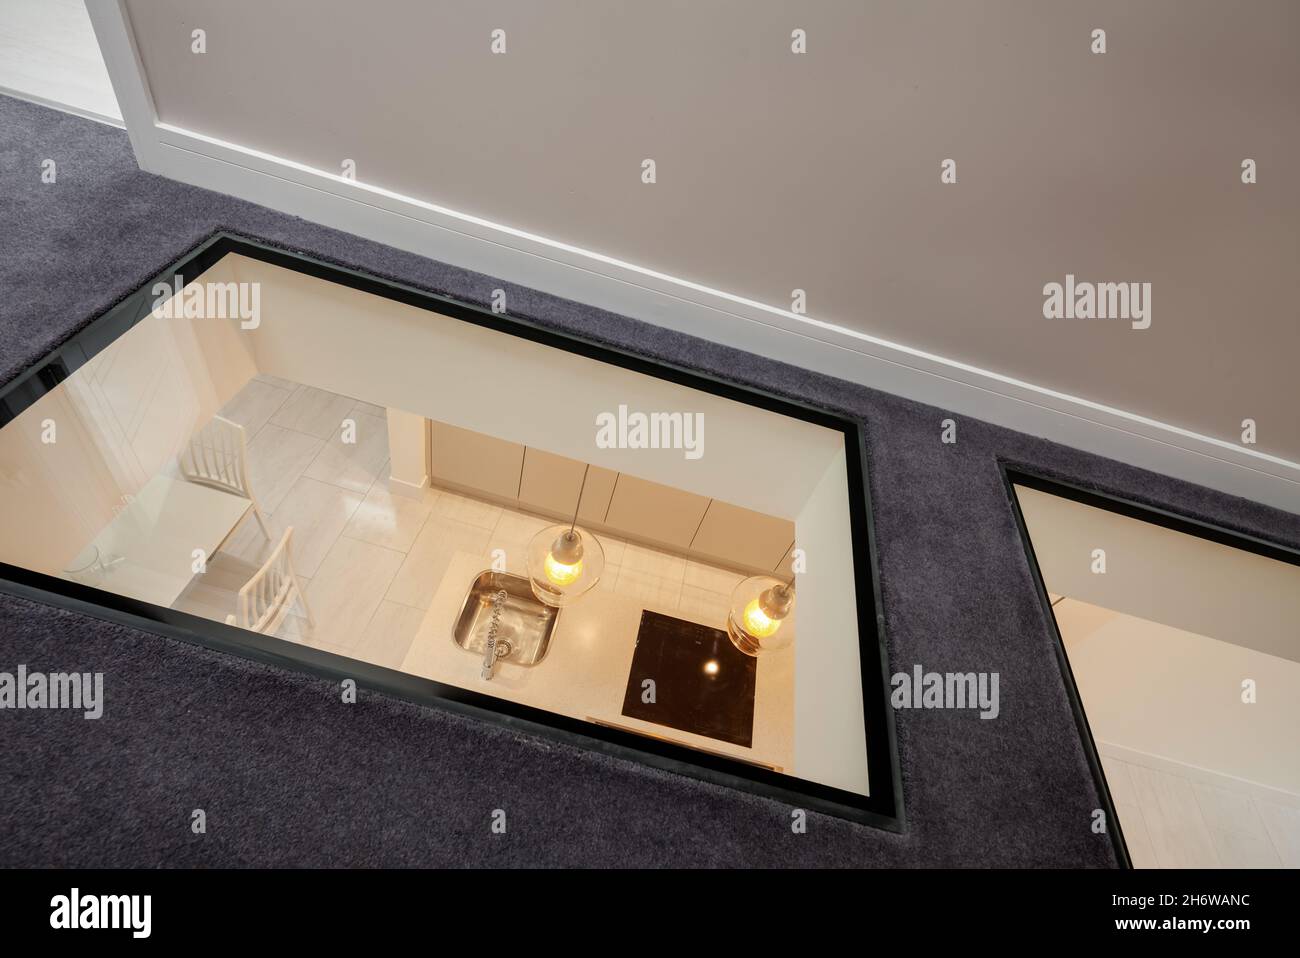 Cambridge, England - August 16 2019: Modern first floor landing area in renovated vacant house with unusual glass floor looking down into kitchen Stock Photo